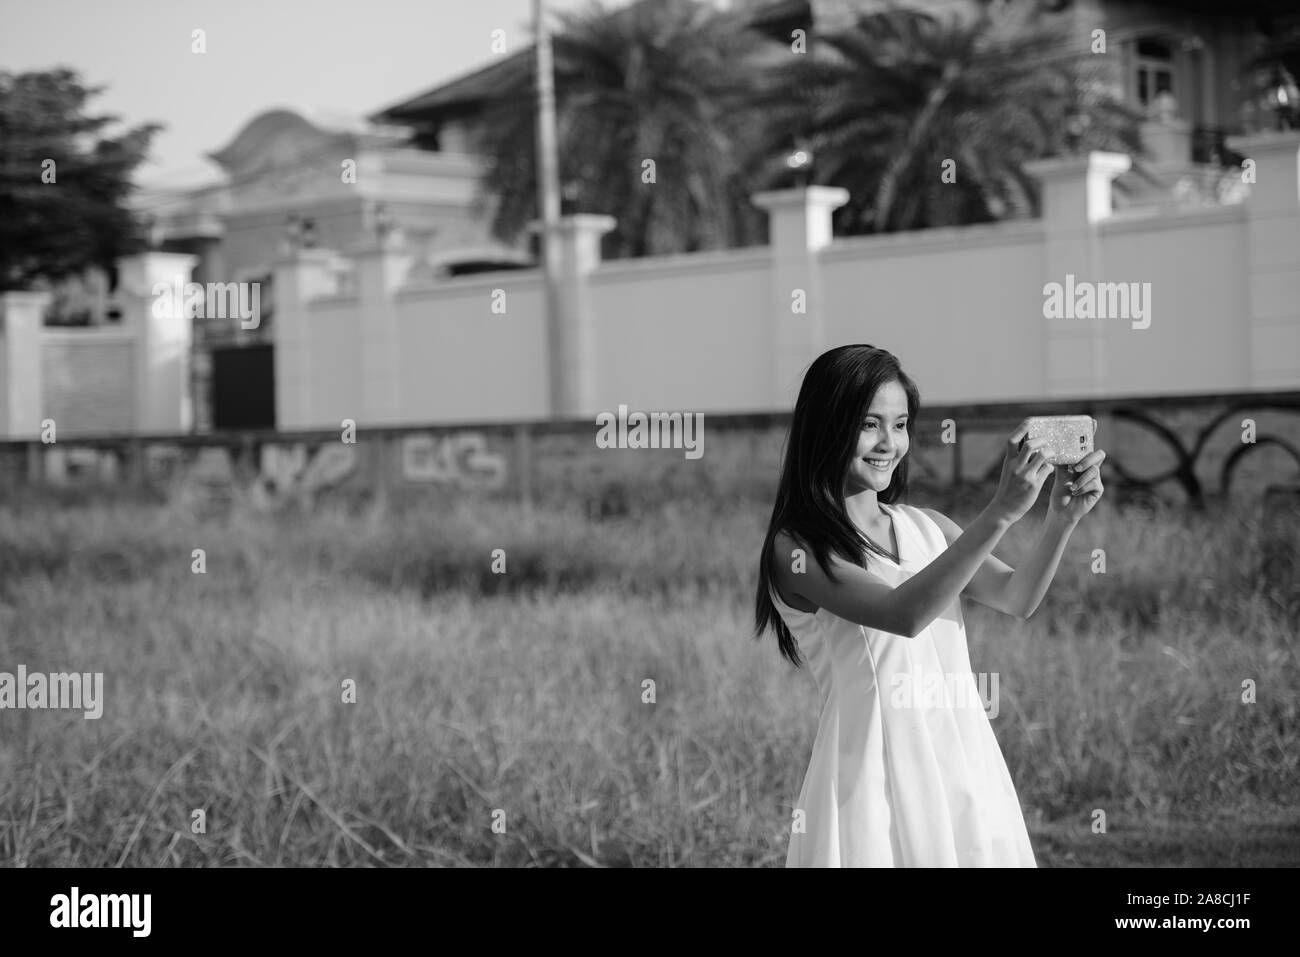 Young happy Asian woman smiling while taking selfie picture with mobile phone against grass field and fancy house Stock Photo